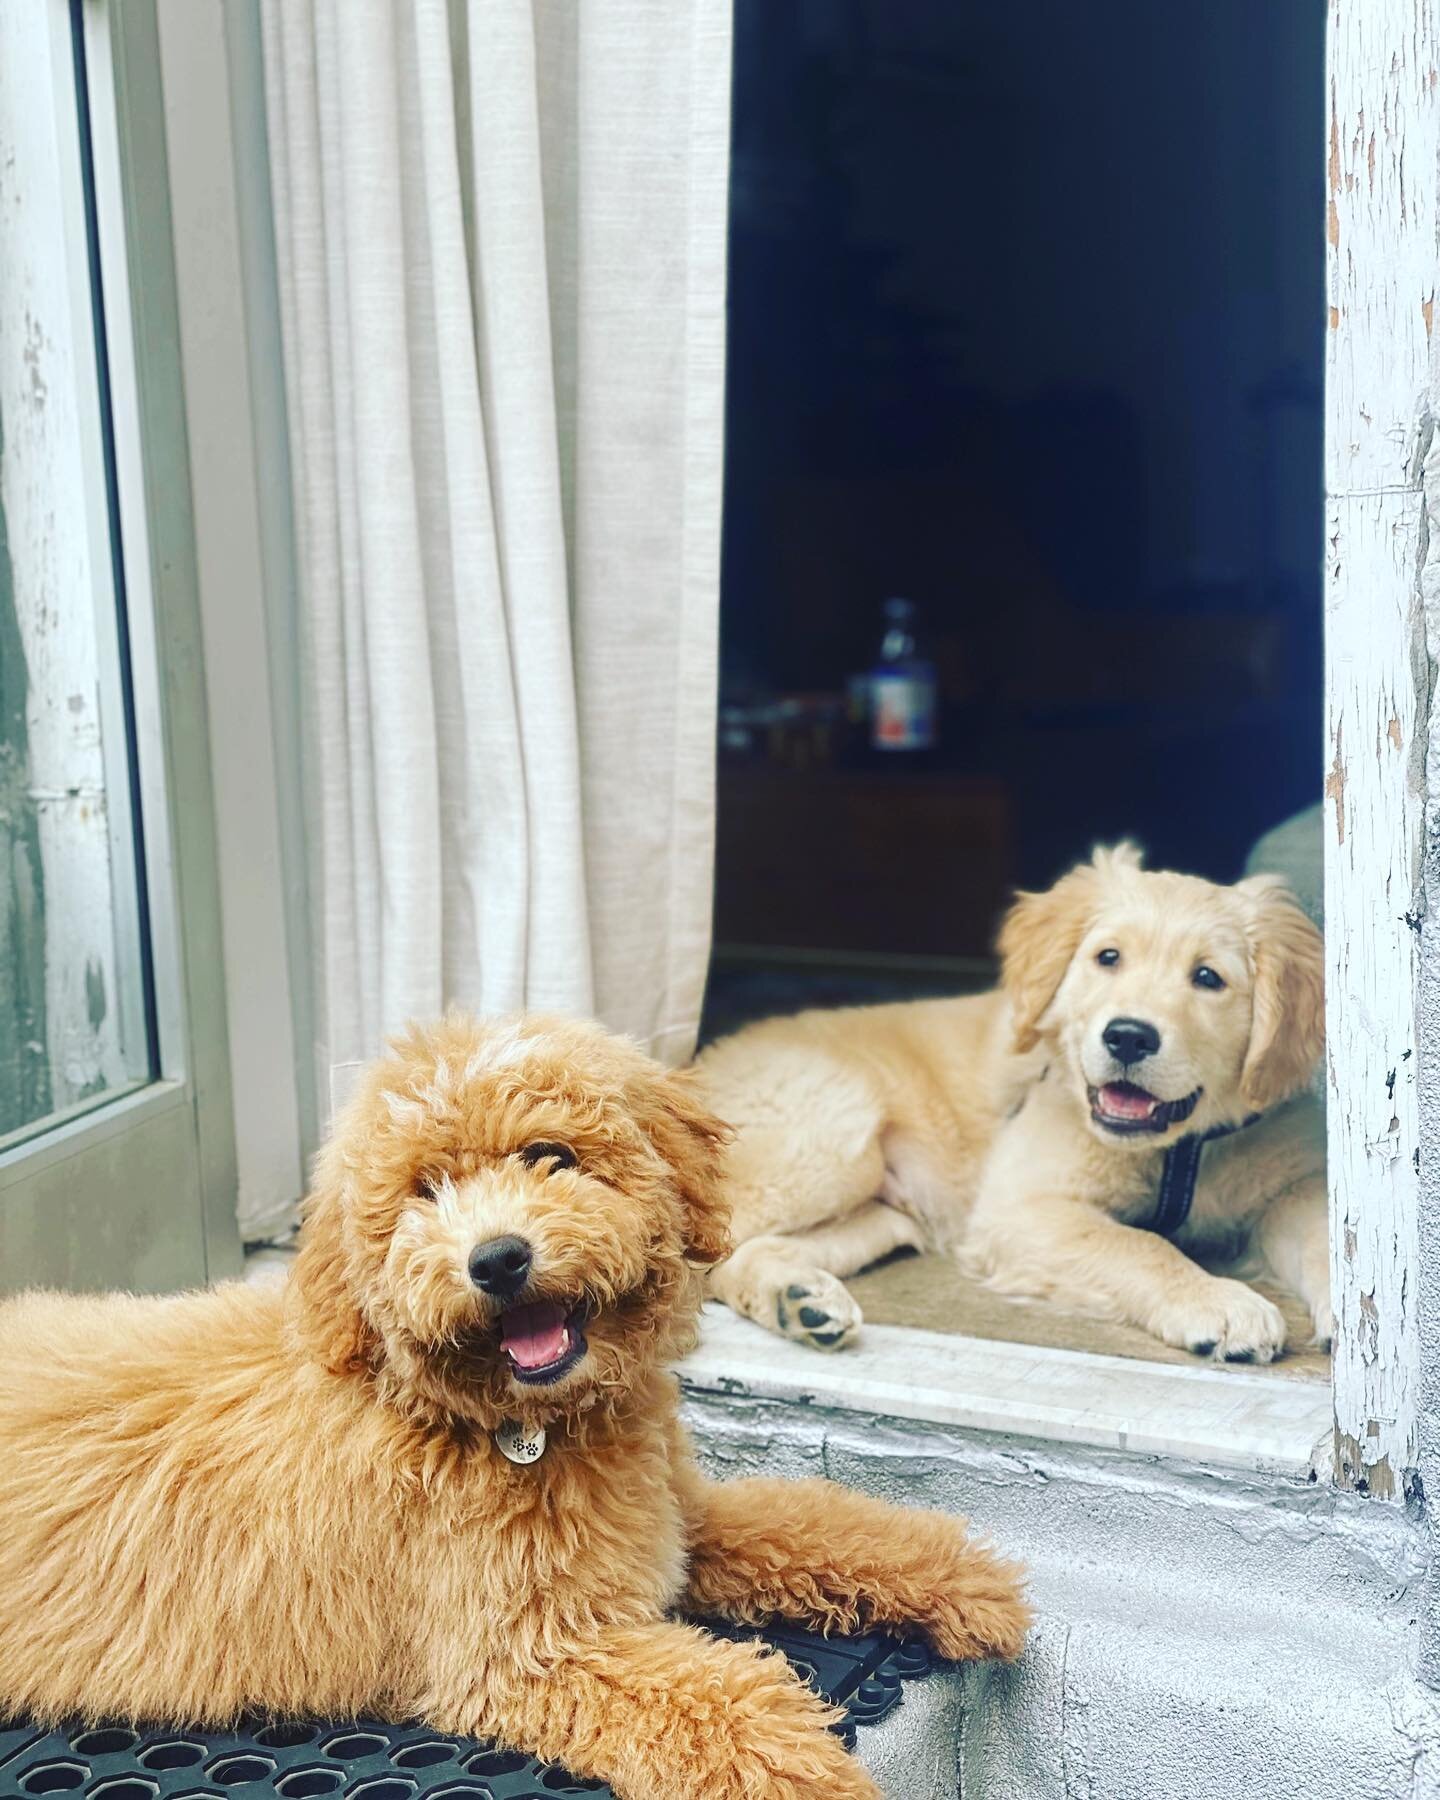 Happy Monday! Here's a picture of Darcy and @charliedarwinthedoodle just being golden cuties.⁠⁠